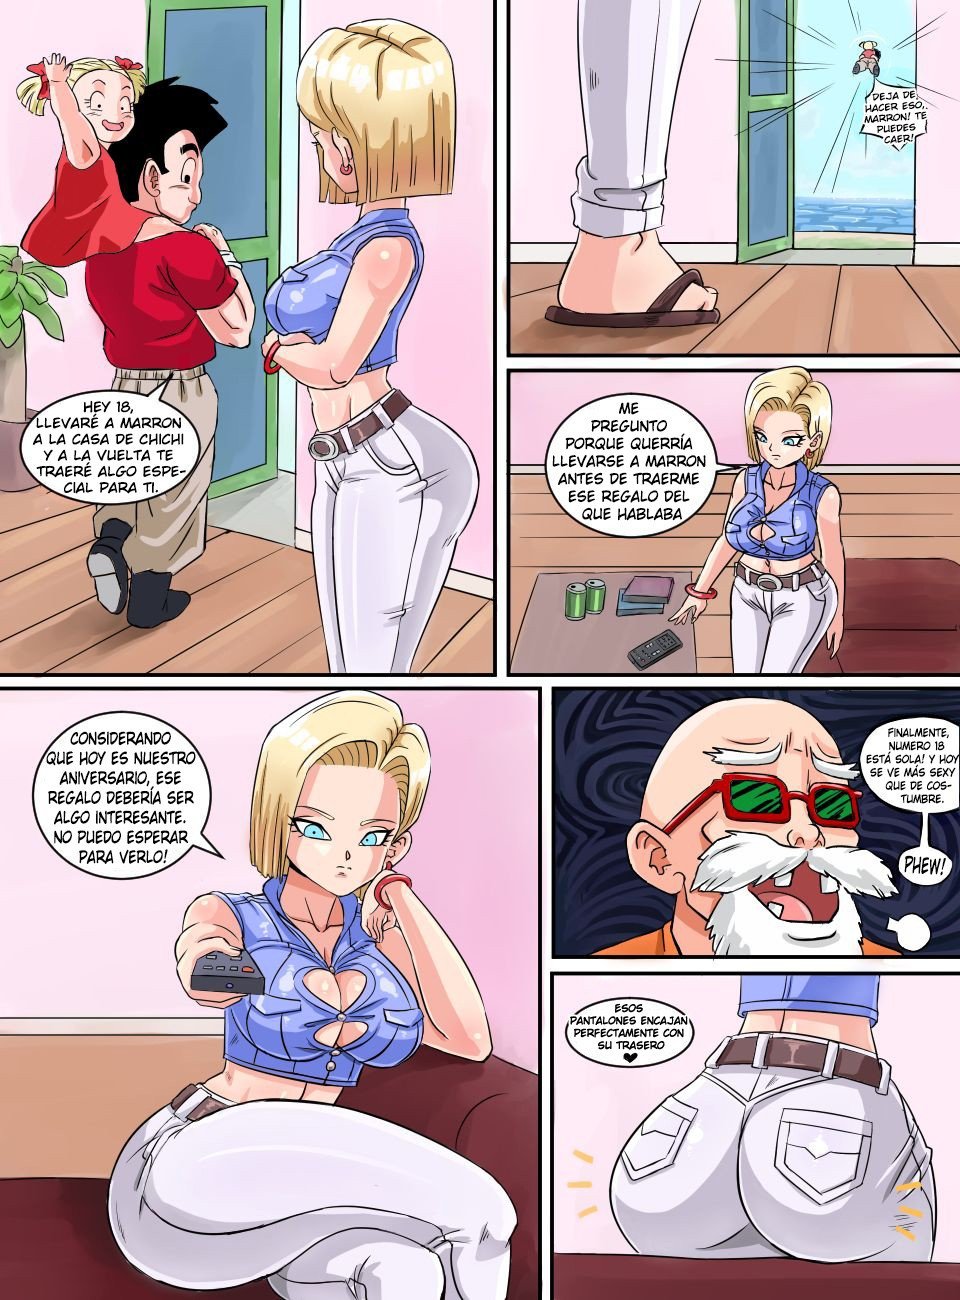 Android 18 is Alone - 1